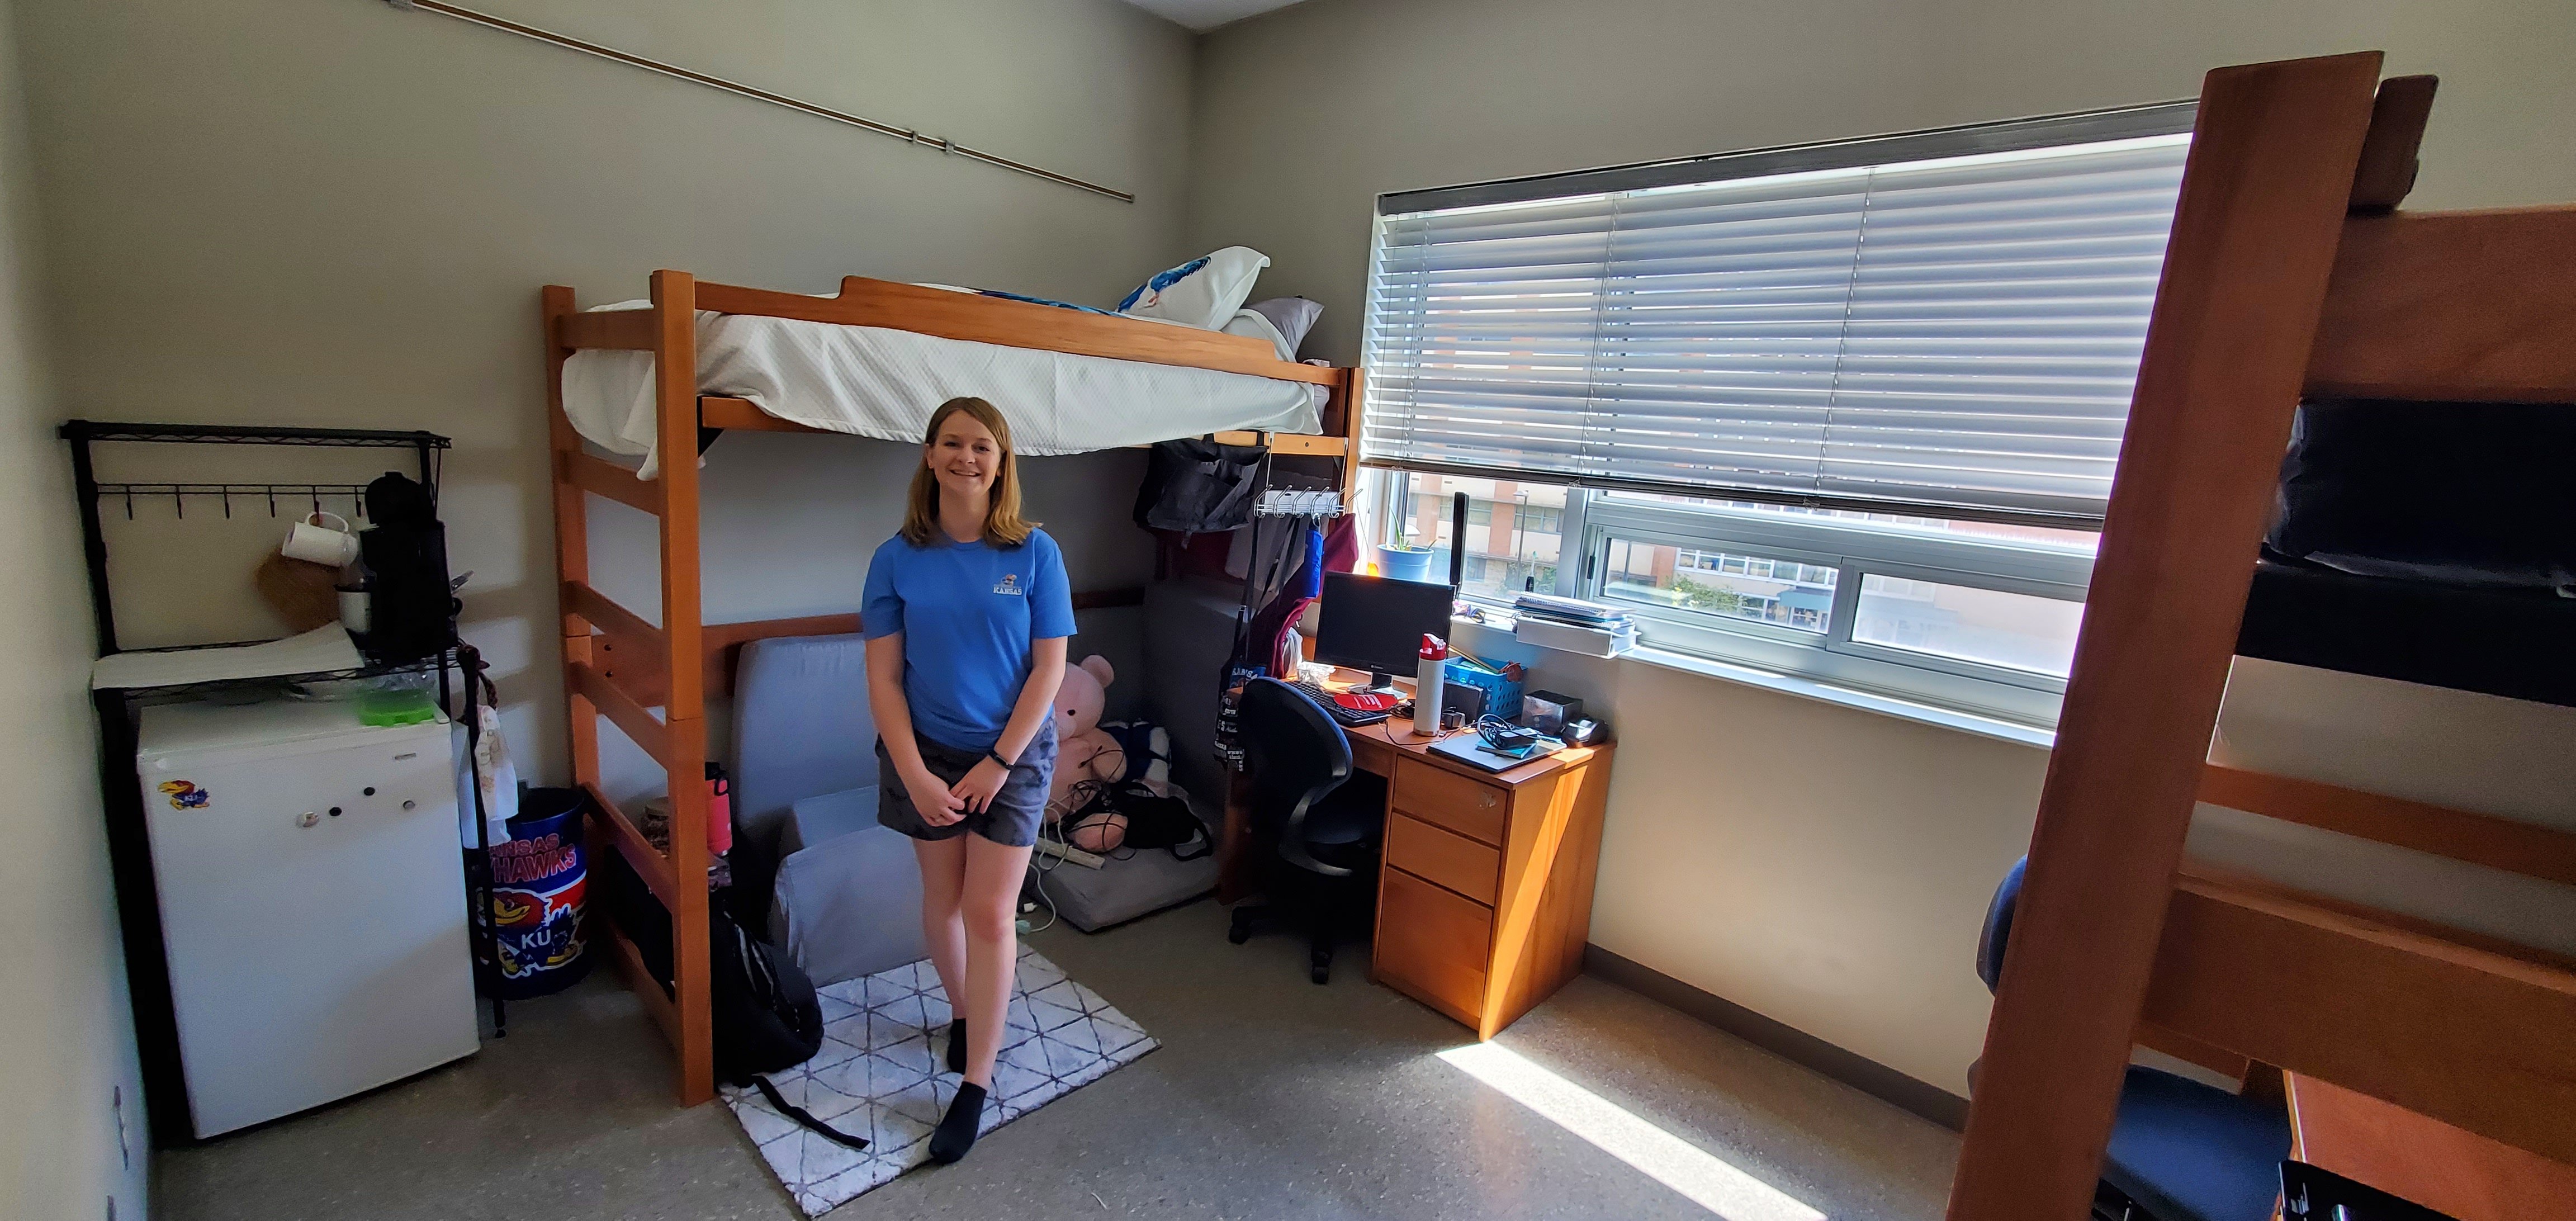 Getting Morgan moved into the dorm!